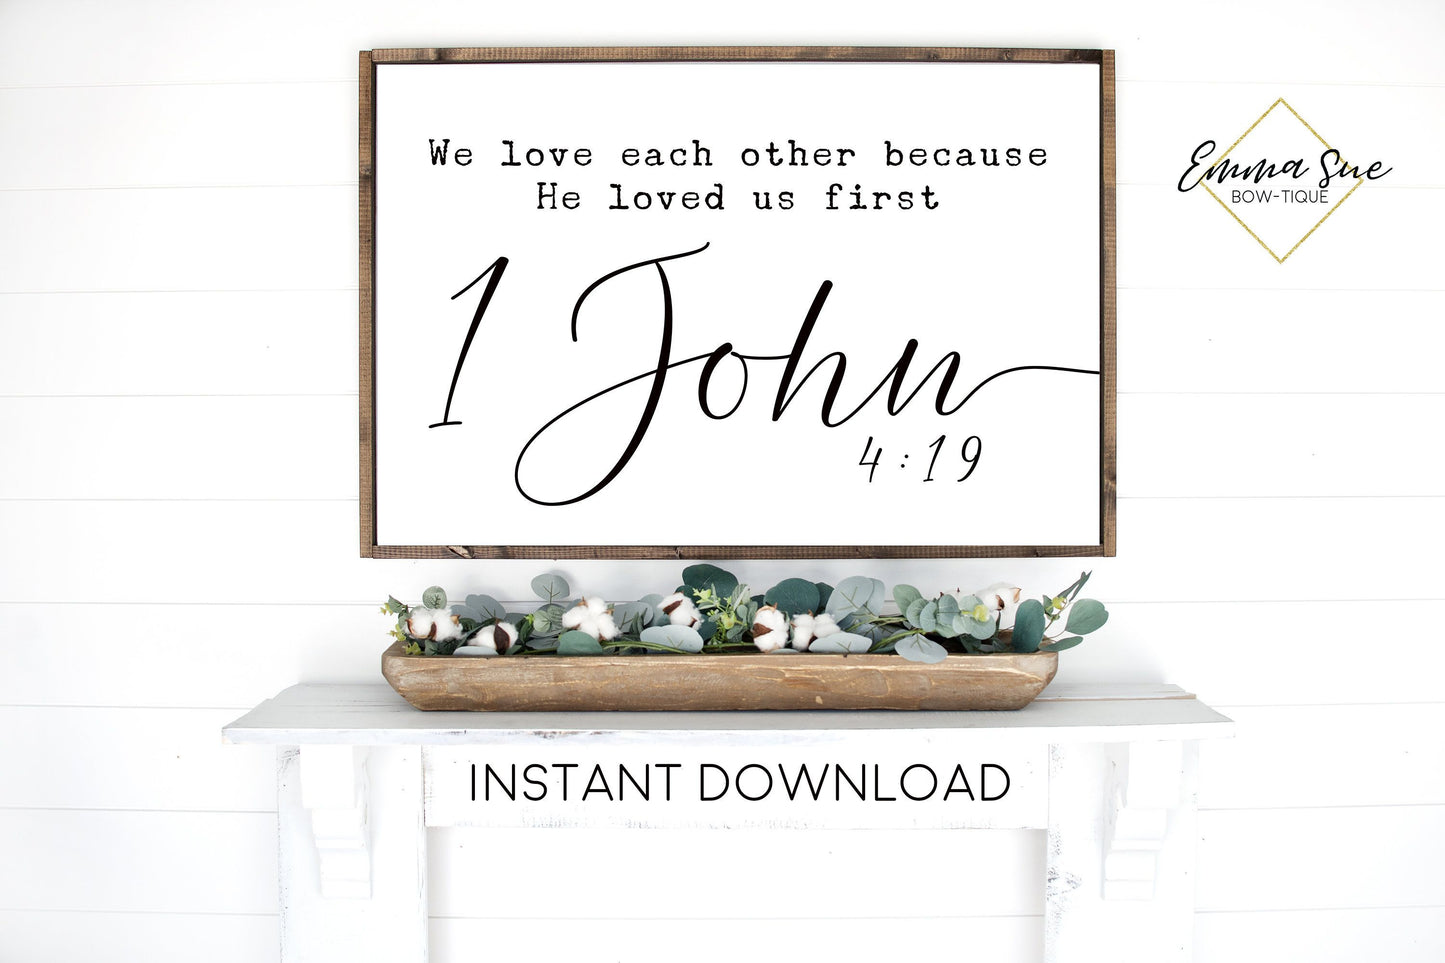 We love each other because he loved us first 1 John 4:19 God's Love Bible Verse Printable Sign